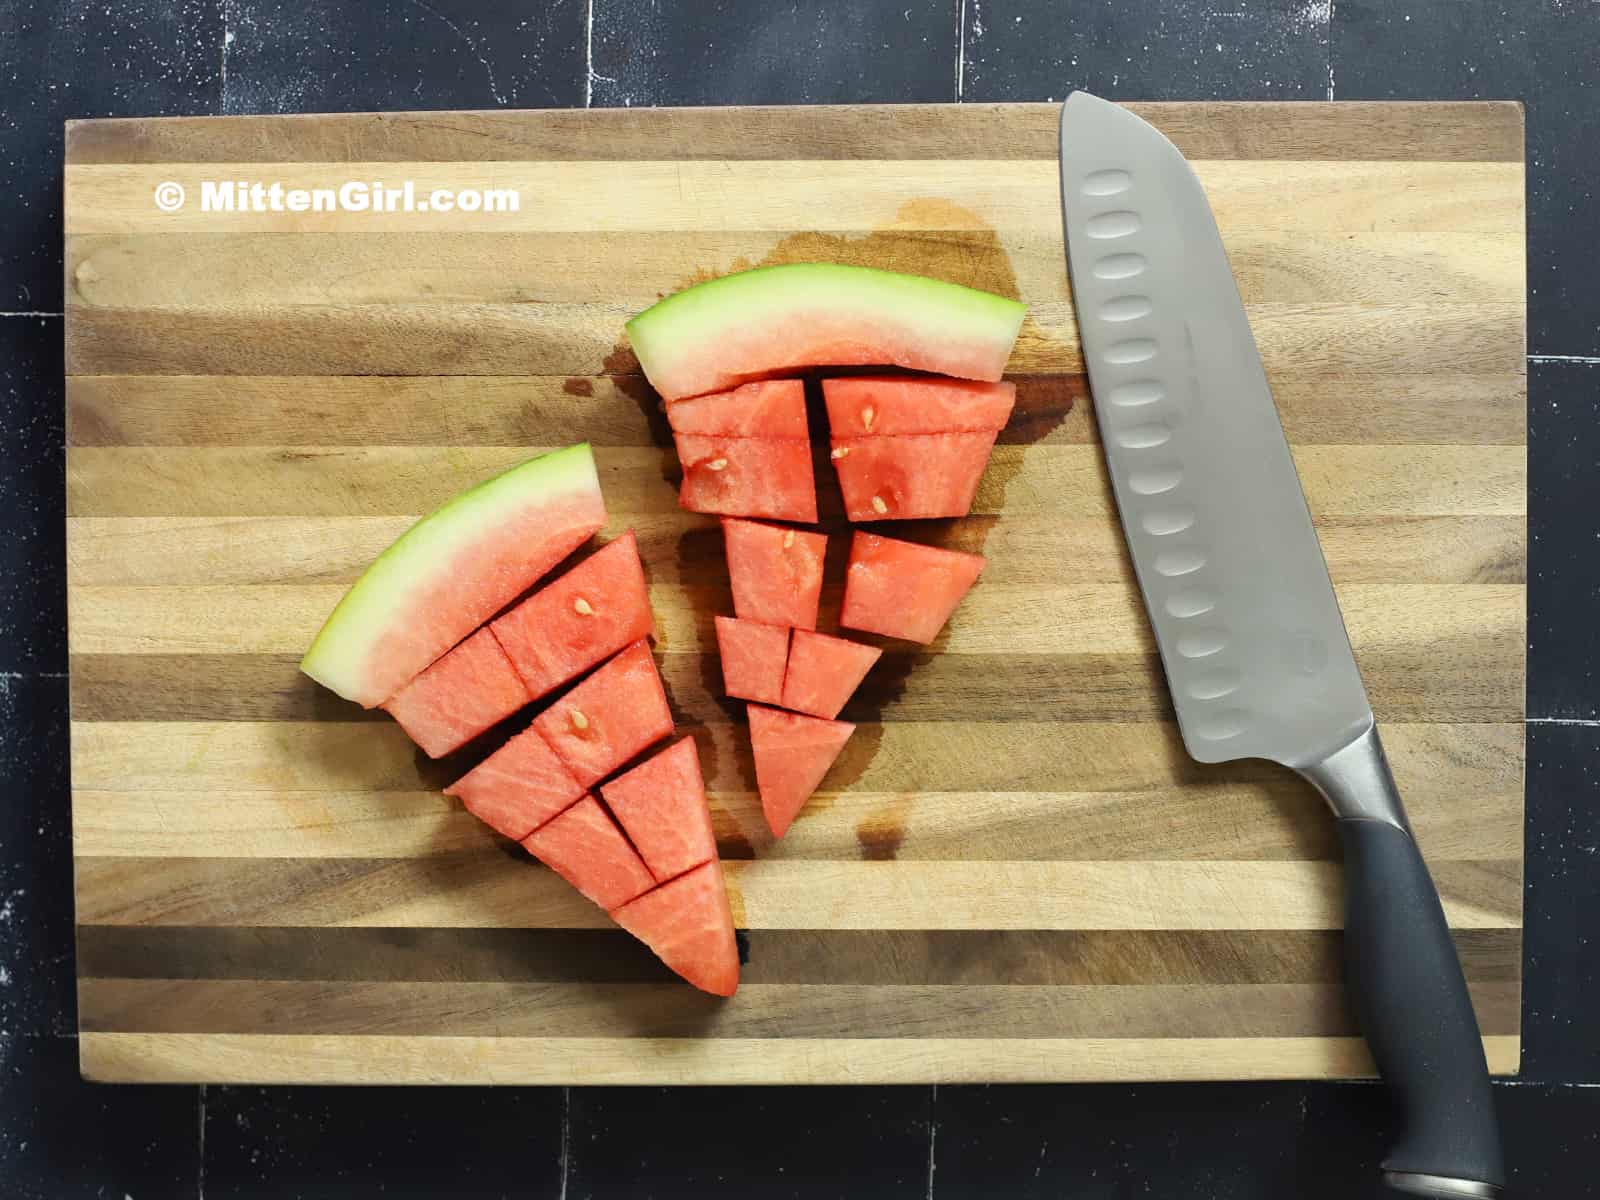 Slices of watermelon and a knife on a cutting board.